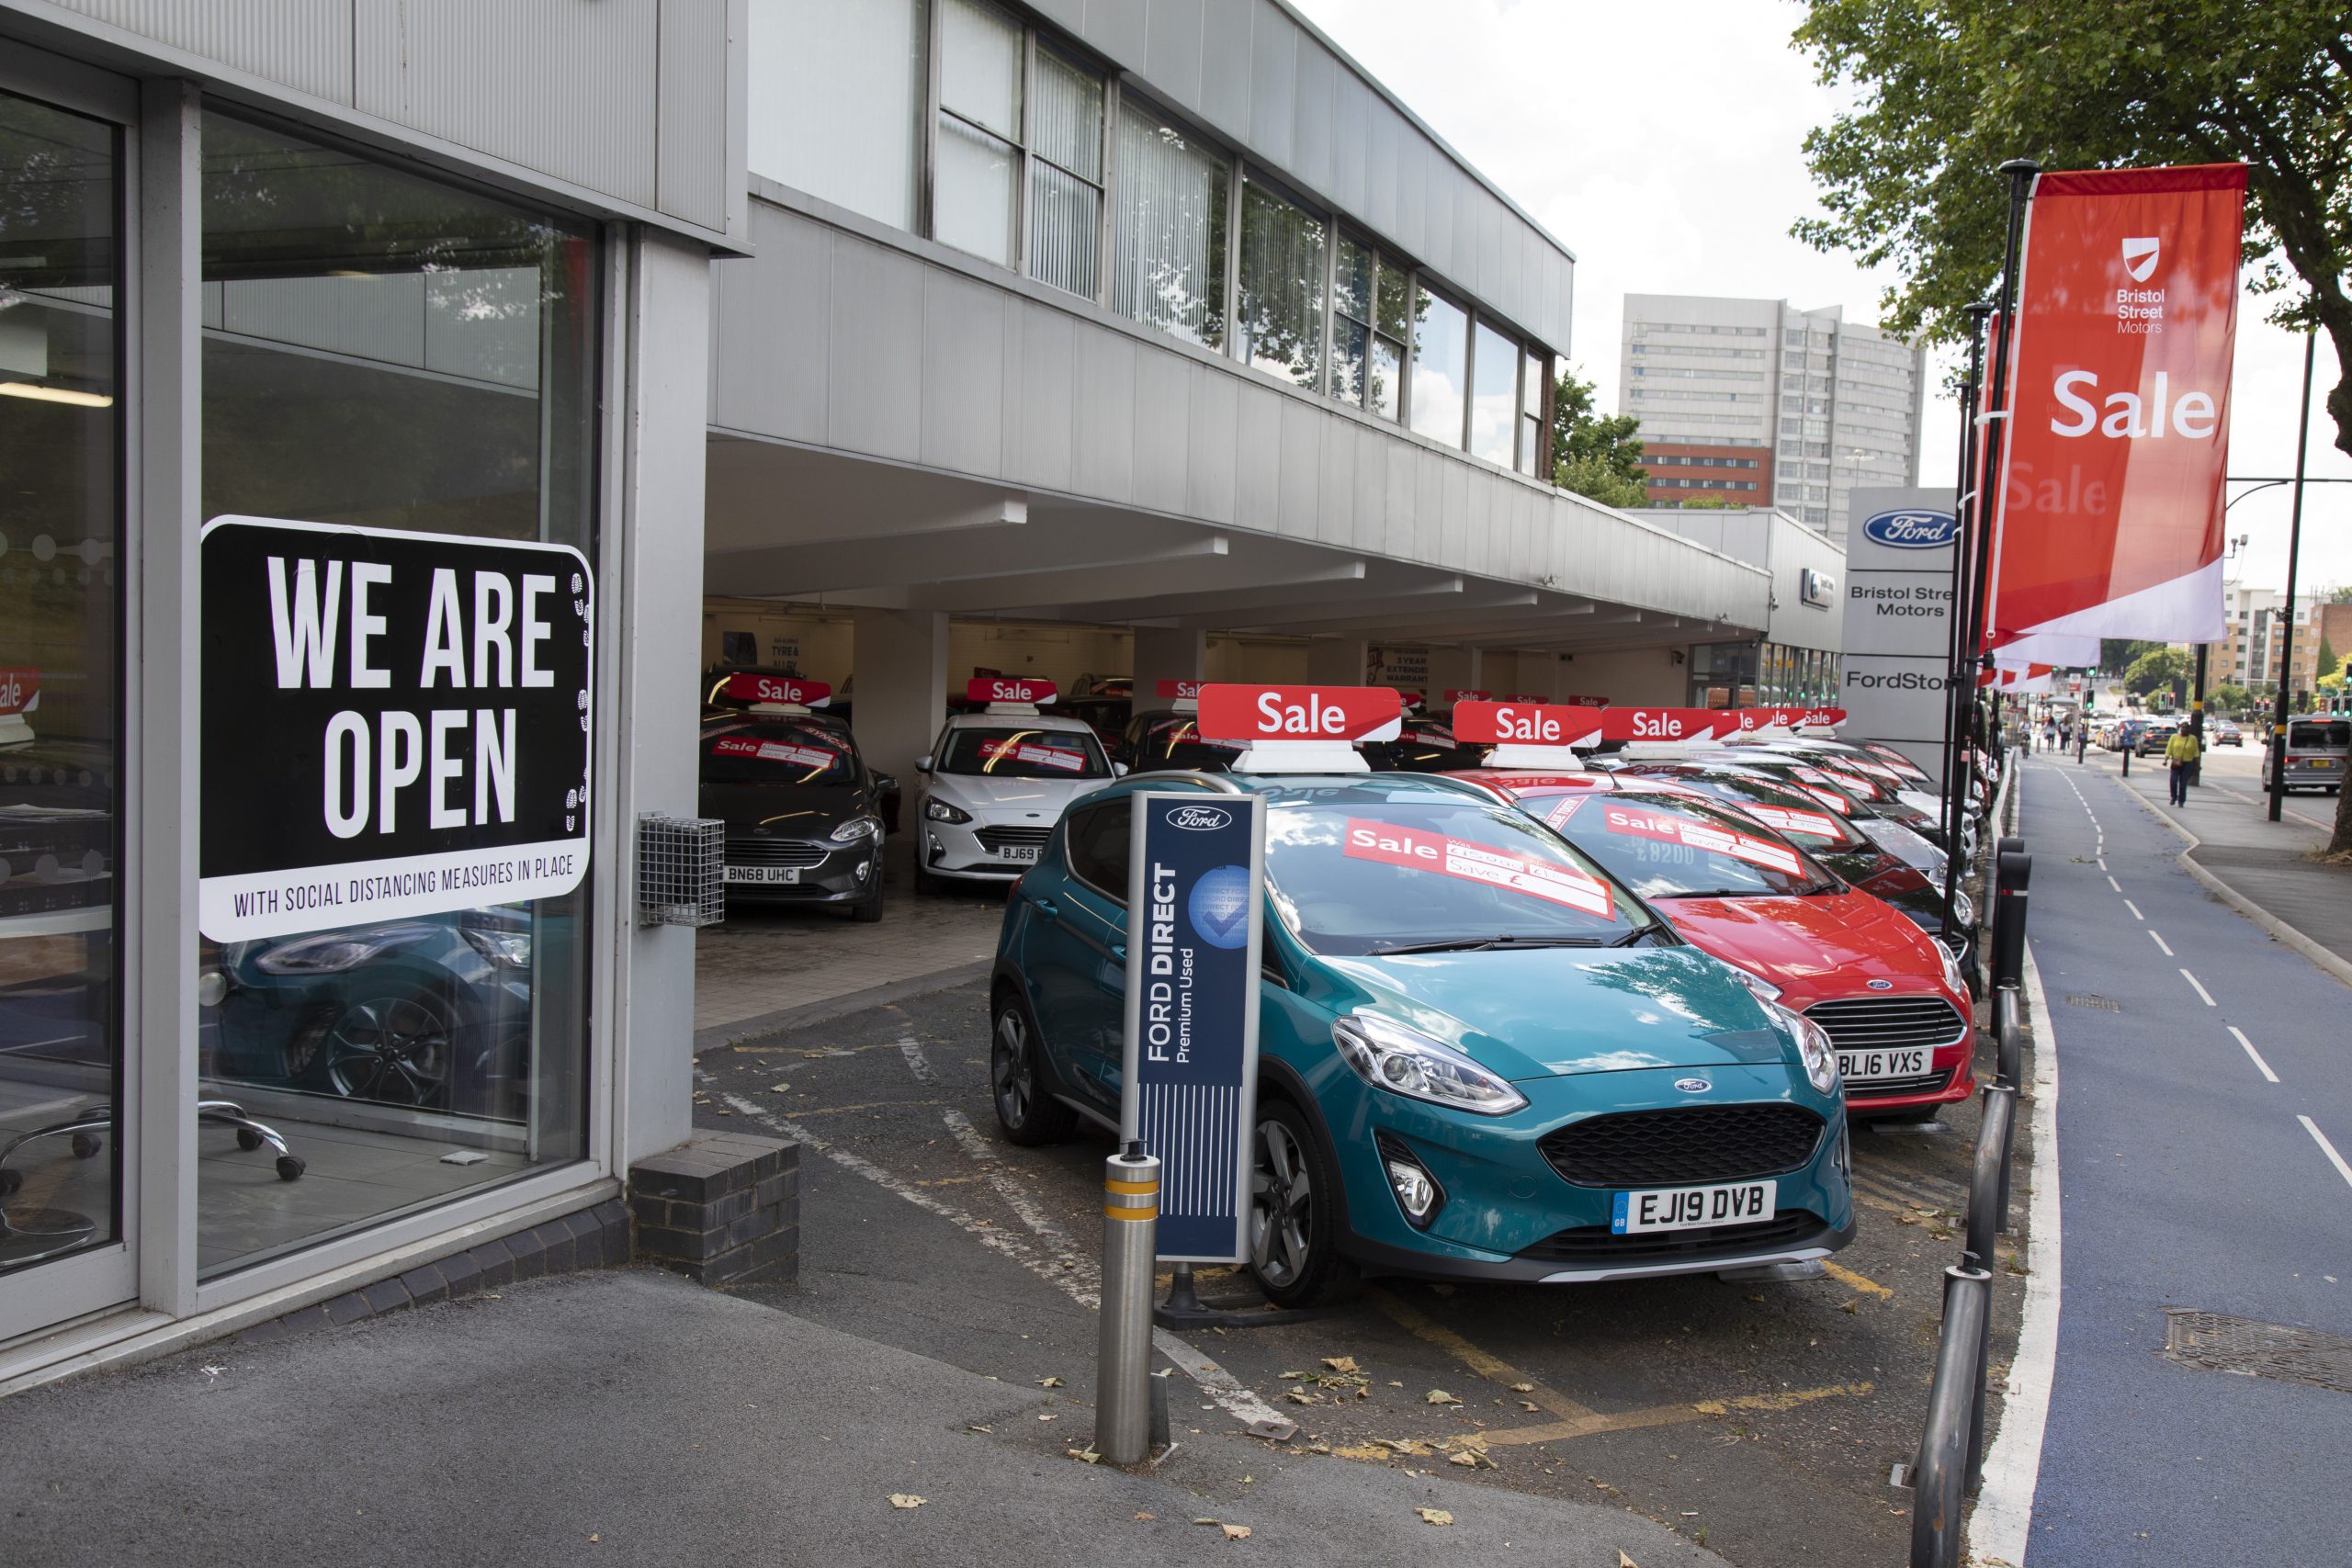 A full used car lot, now a rare sight amid the surge in used car prices everywhere